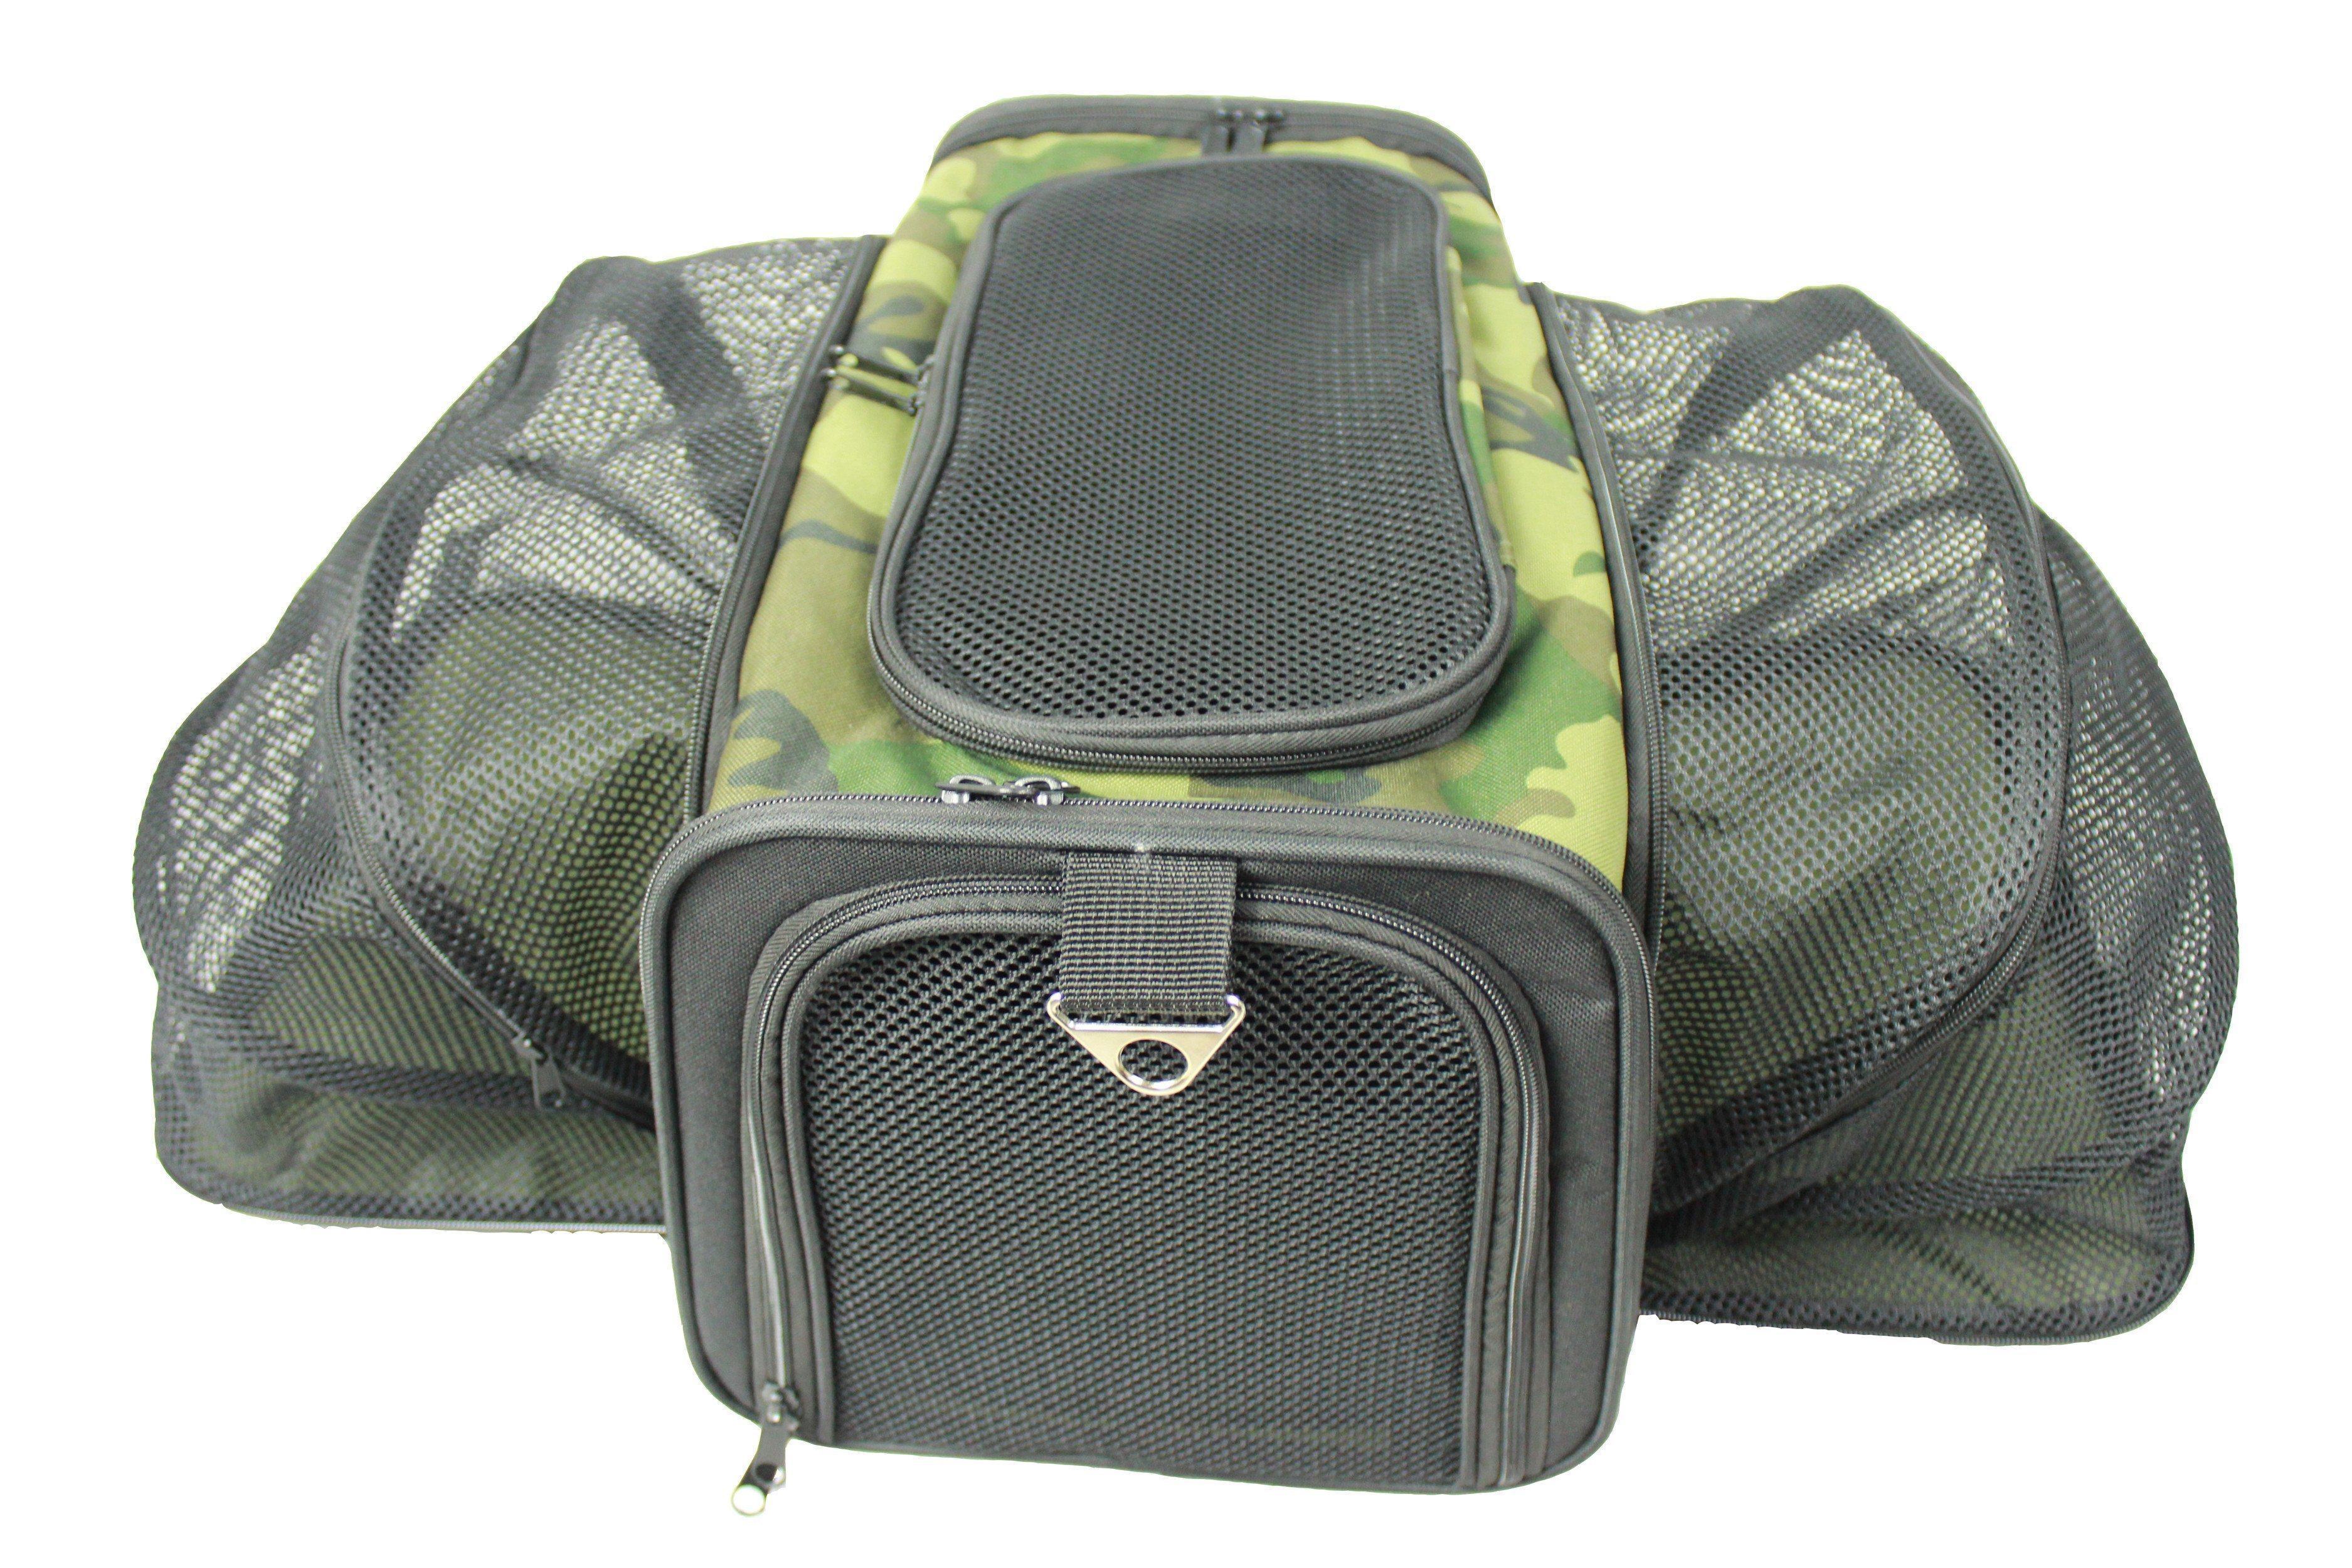 Pet Life ® 'Roomeo' Airline Approved Dual Expandable and Folding Collapsible Fashion Travel Pet Dog Carrier Crate Camouflage 